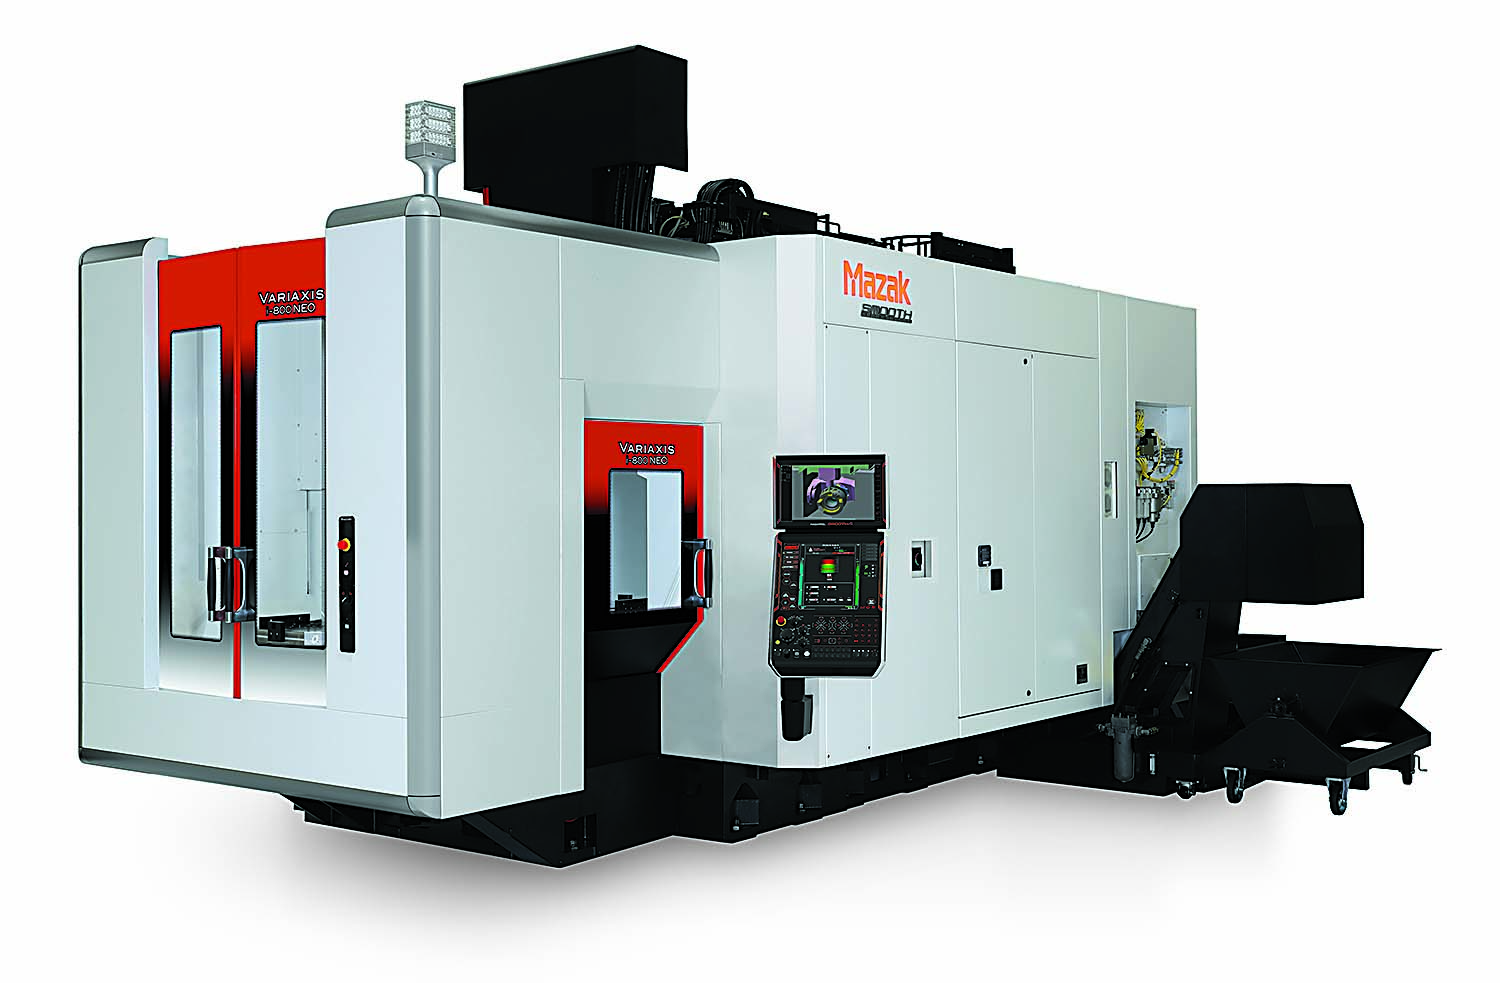 = The Variaxis i-800 NEO vertical machining center is designed to offer significant improvements over its predecessor.